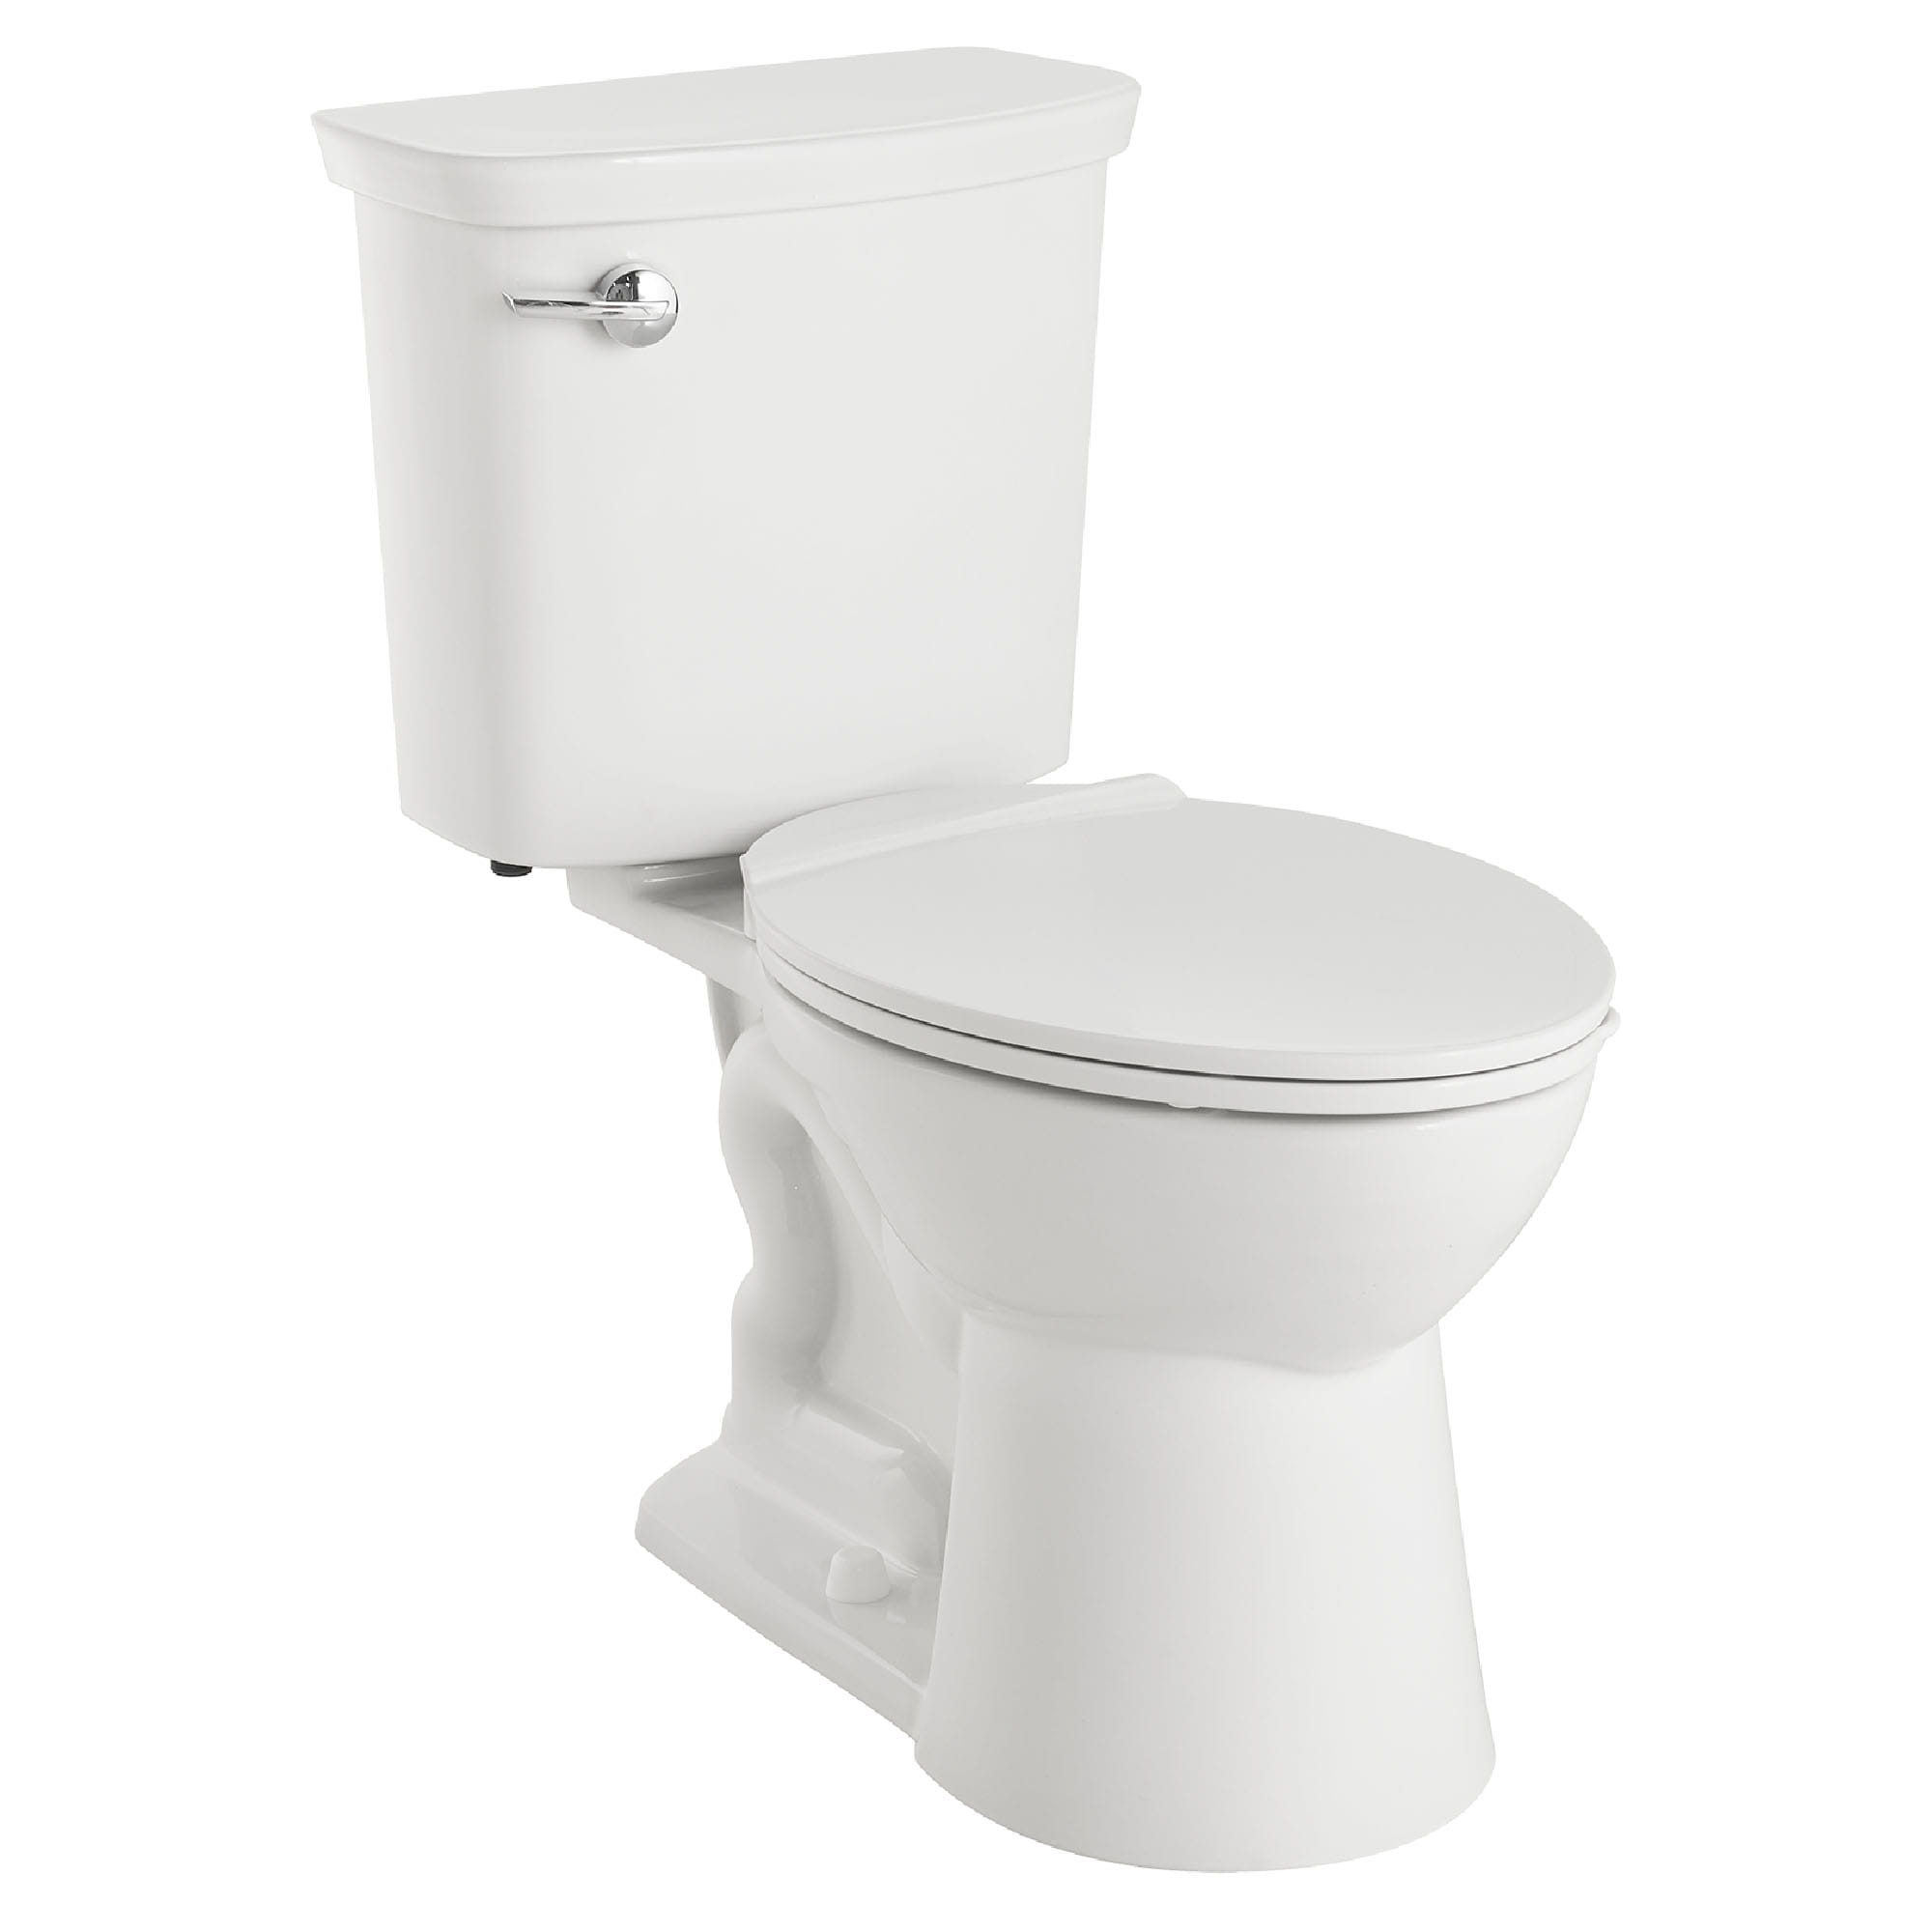 VorMax® Plus Two-Piece 1.0 gpf/3.8 Lpf Chair Height Elongated Toilet With Seat